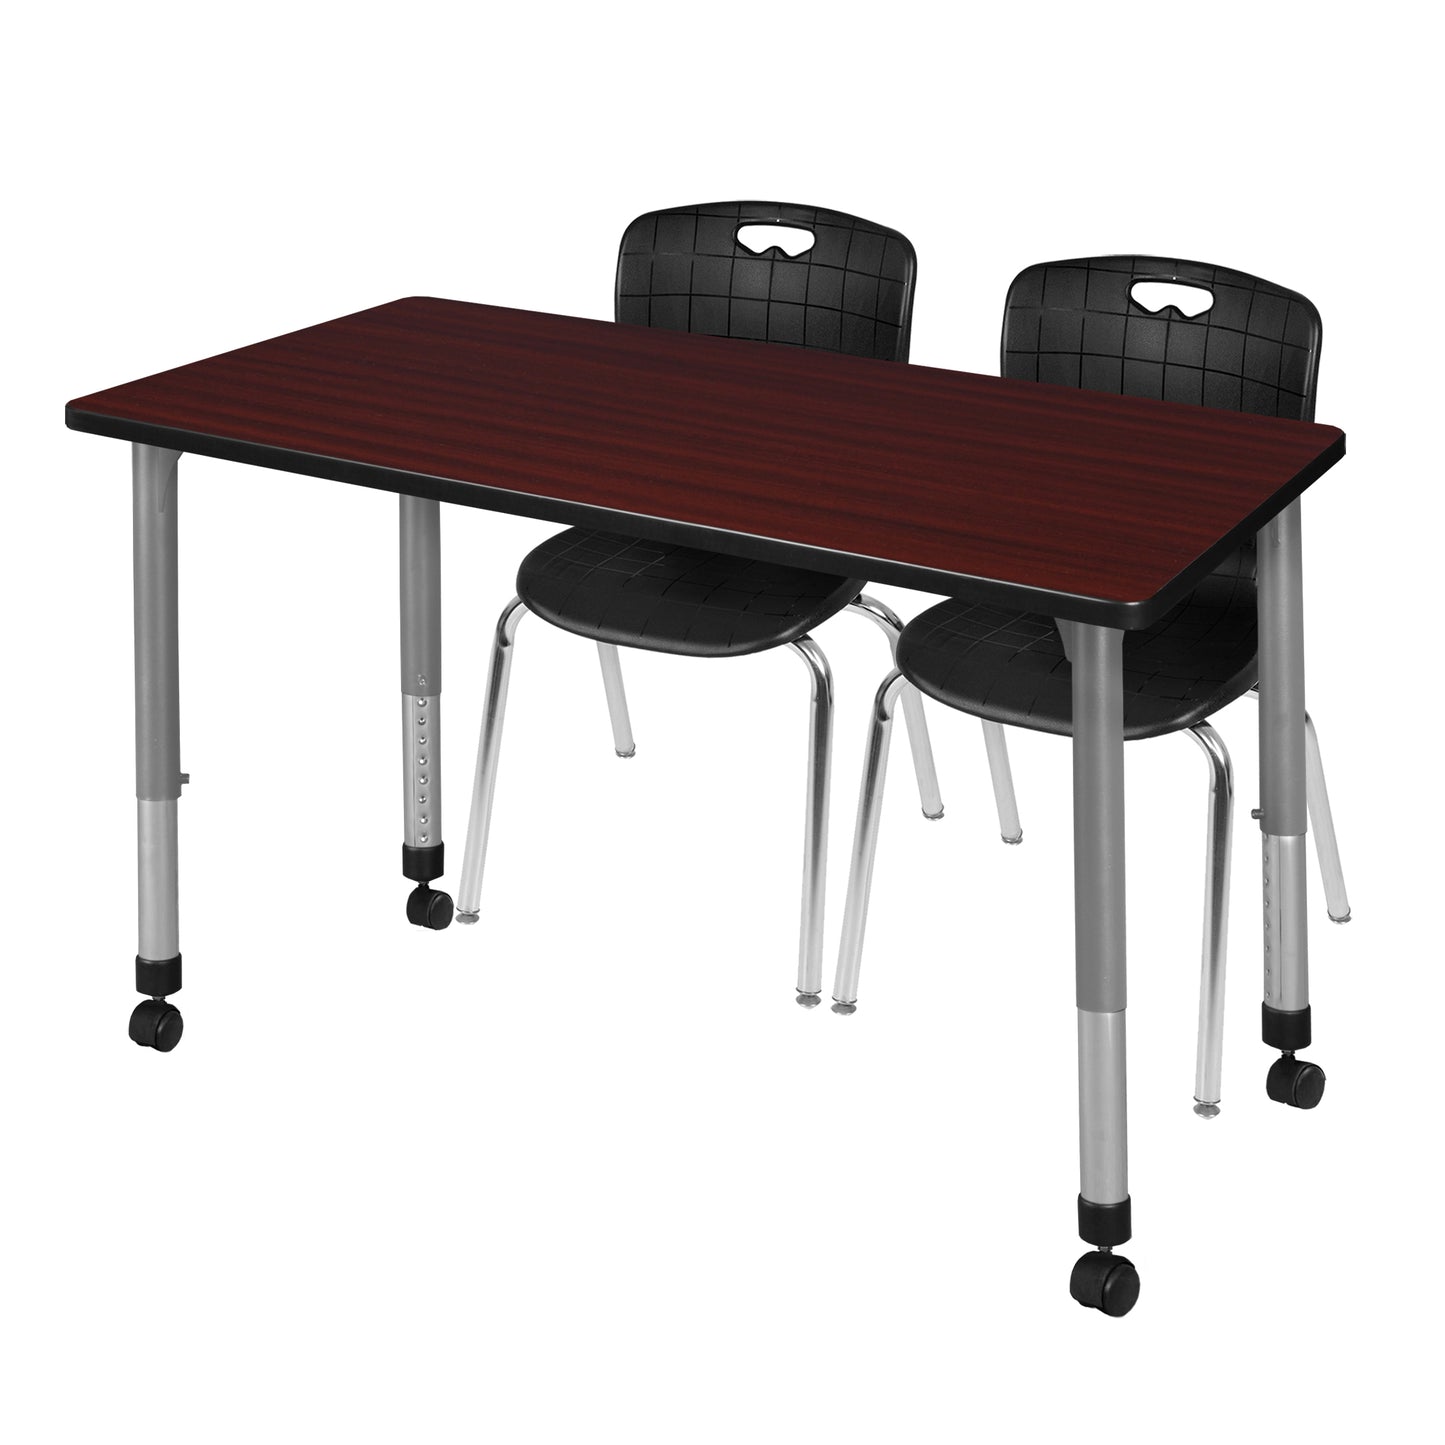 Regency Kee 48 x 30 in. Adjustable Classroom Table & 2 Andy 18 in. Stack Chairs